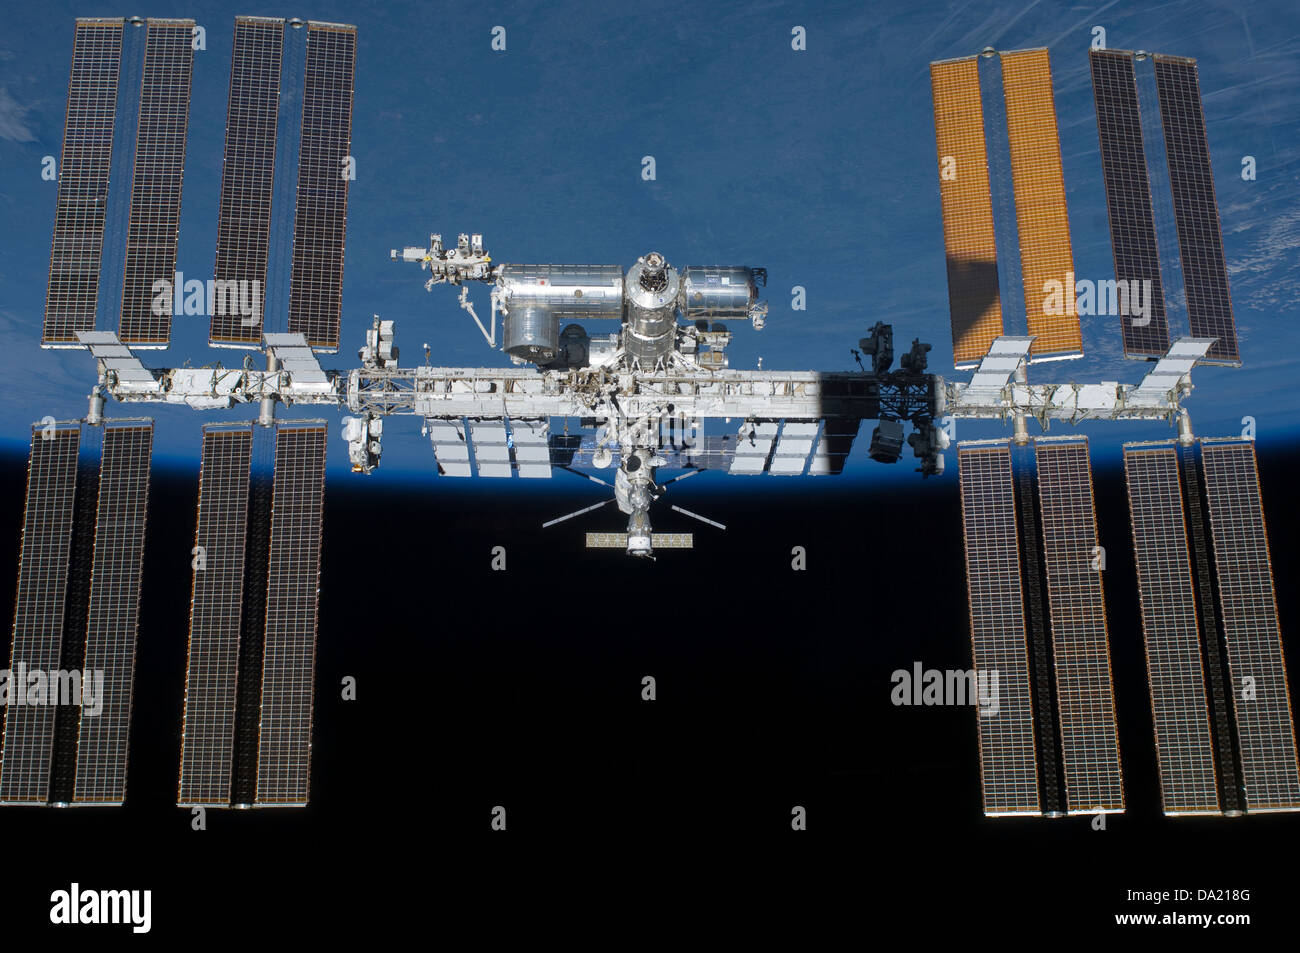 computer enhanced NASA image of International Space Station (ISS) flying above earth Stock Photo